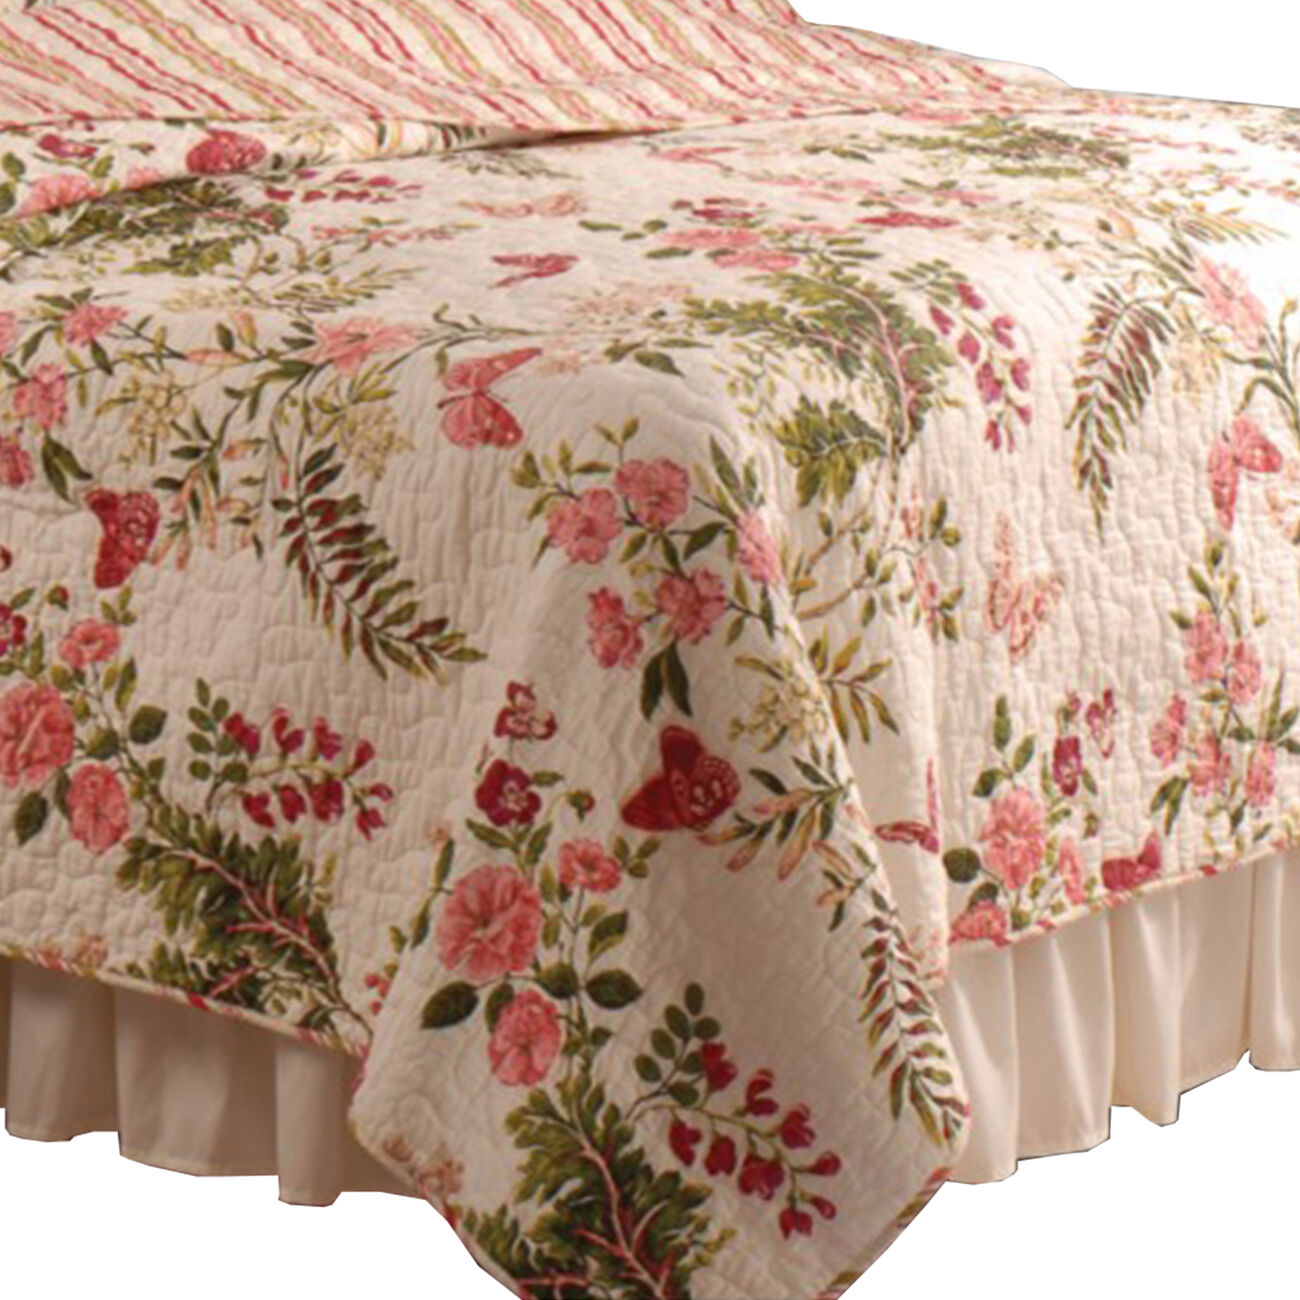 Atlanta Fabric 3 Piece King Size Quilt Set with Butterfly Prints,Multicolor